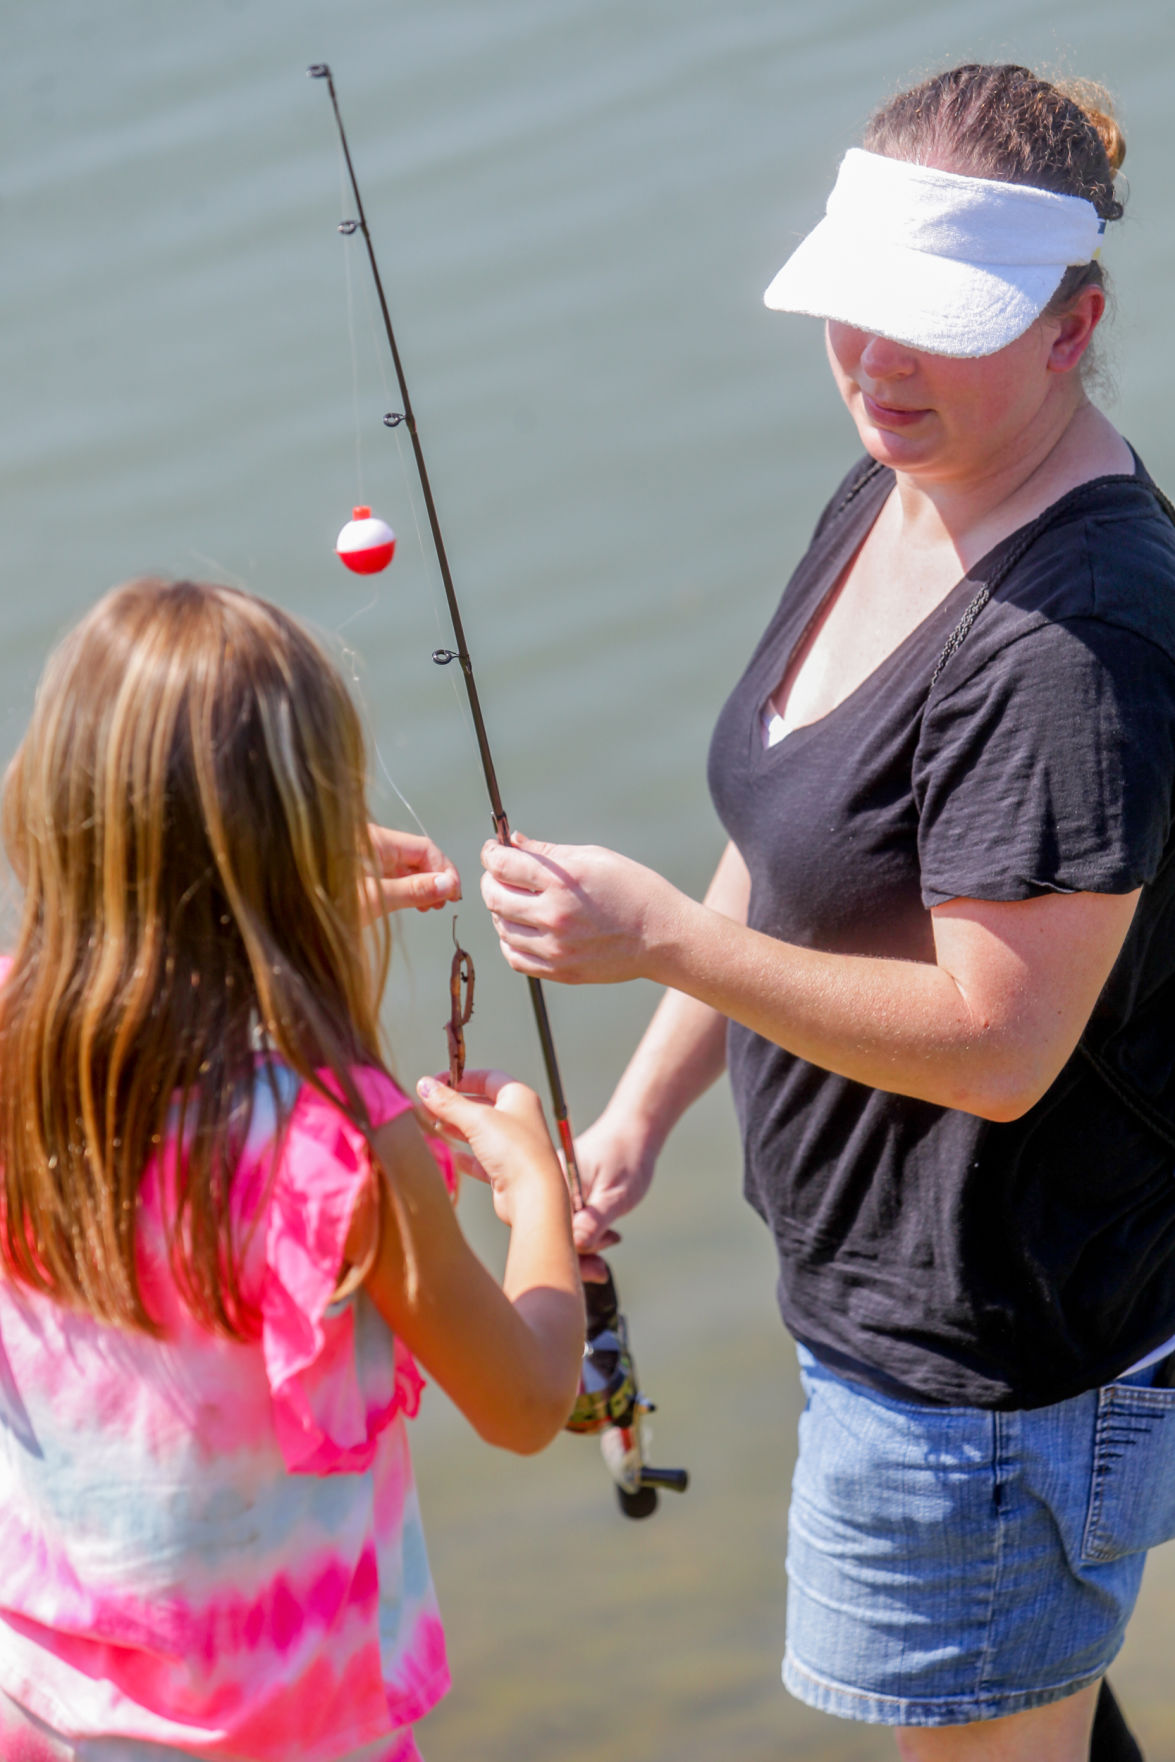 WV celebrates Free Fishing Weekend Features/Entertainment herald